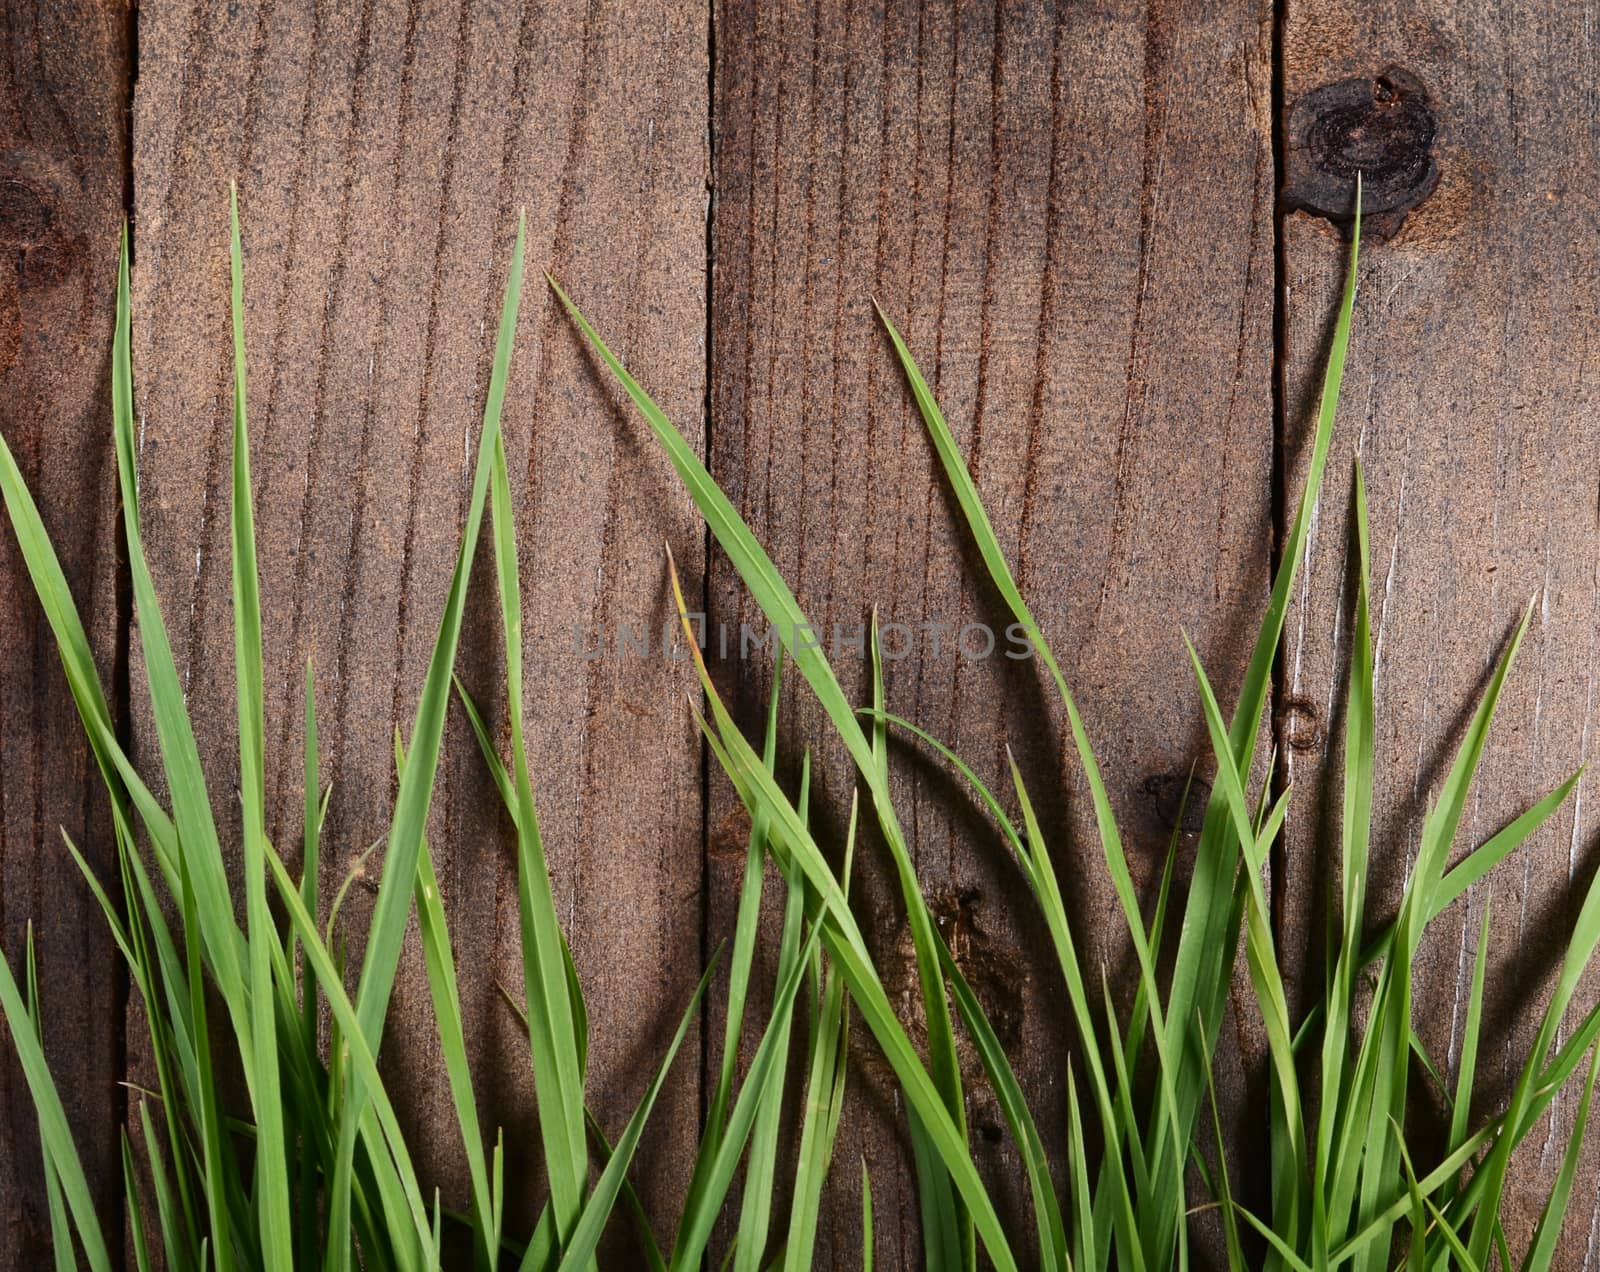 The green grass on a wooden background